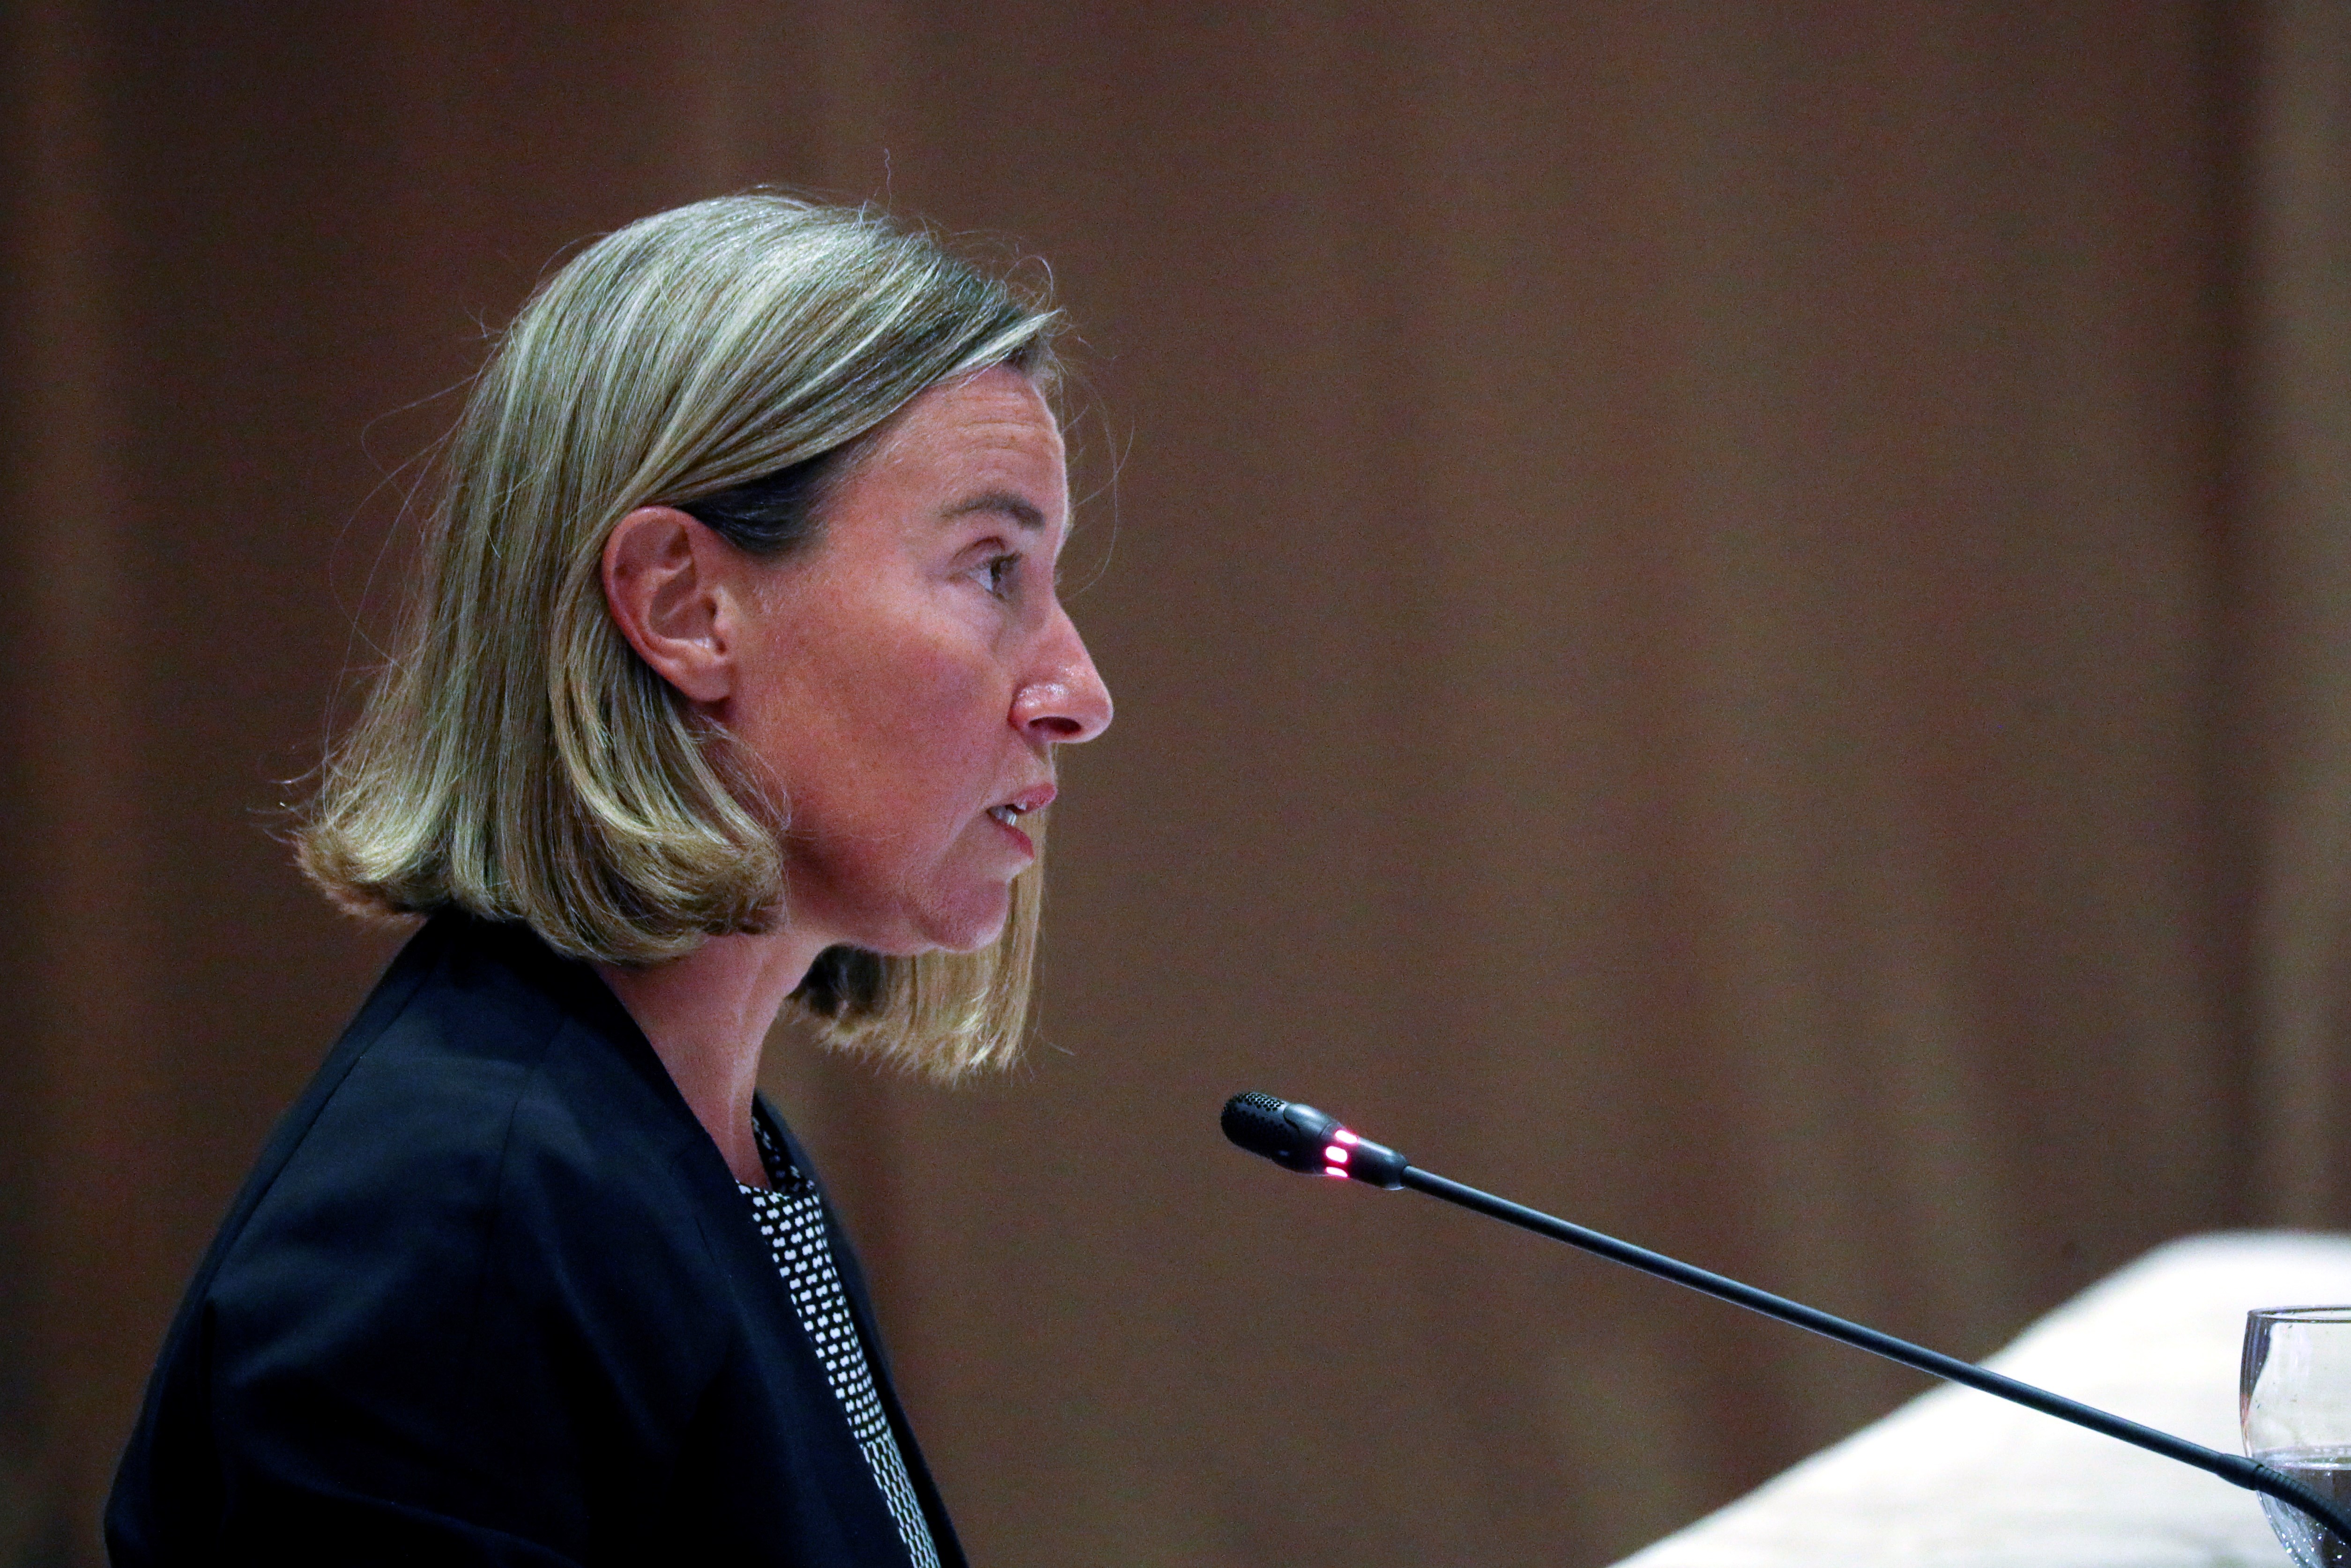 epa06924910 High Representative of the European Union for Foreign Affairs and Security Policy Federica Mogherini delivers her address during the meeting between the European Union and ASEAN foreign ministers at the 51st ASEAN Foreign Ministers' Meeting (AMM) in Singapore, 03 August 2018. The 51st Association of South East Asian Nations (ASEAN) Foreign Ministers' Meeting (AMM) and Related Meetings takes place in Singapore from 01 to 04 August under the theme 'Resilient and Innovative'. Ministers from the ten member countries: Singapore, Malaysia, Indonesia, Thailand, Vietnam, Myanmar, Laos, Cambodia, Brunei Darussalam, and the Philippines, will meet with their counterparts from China, Russia, South Korea, Japan, the United States, Australia, New Zealand and the European Union. EPA/WALLACE WOON